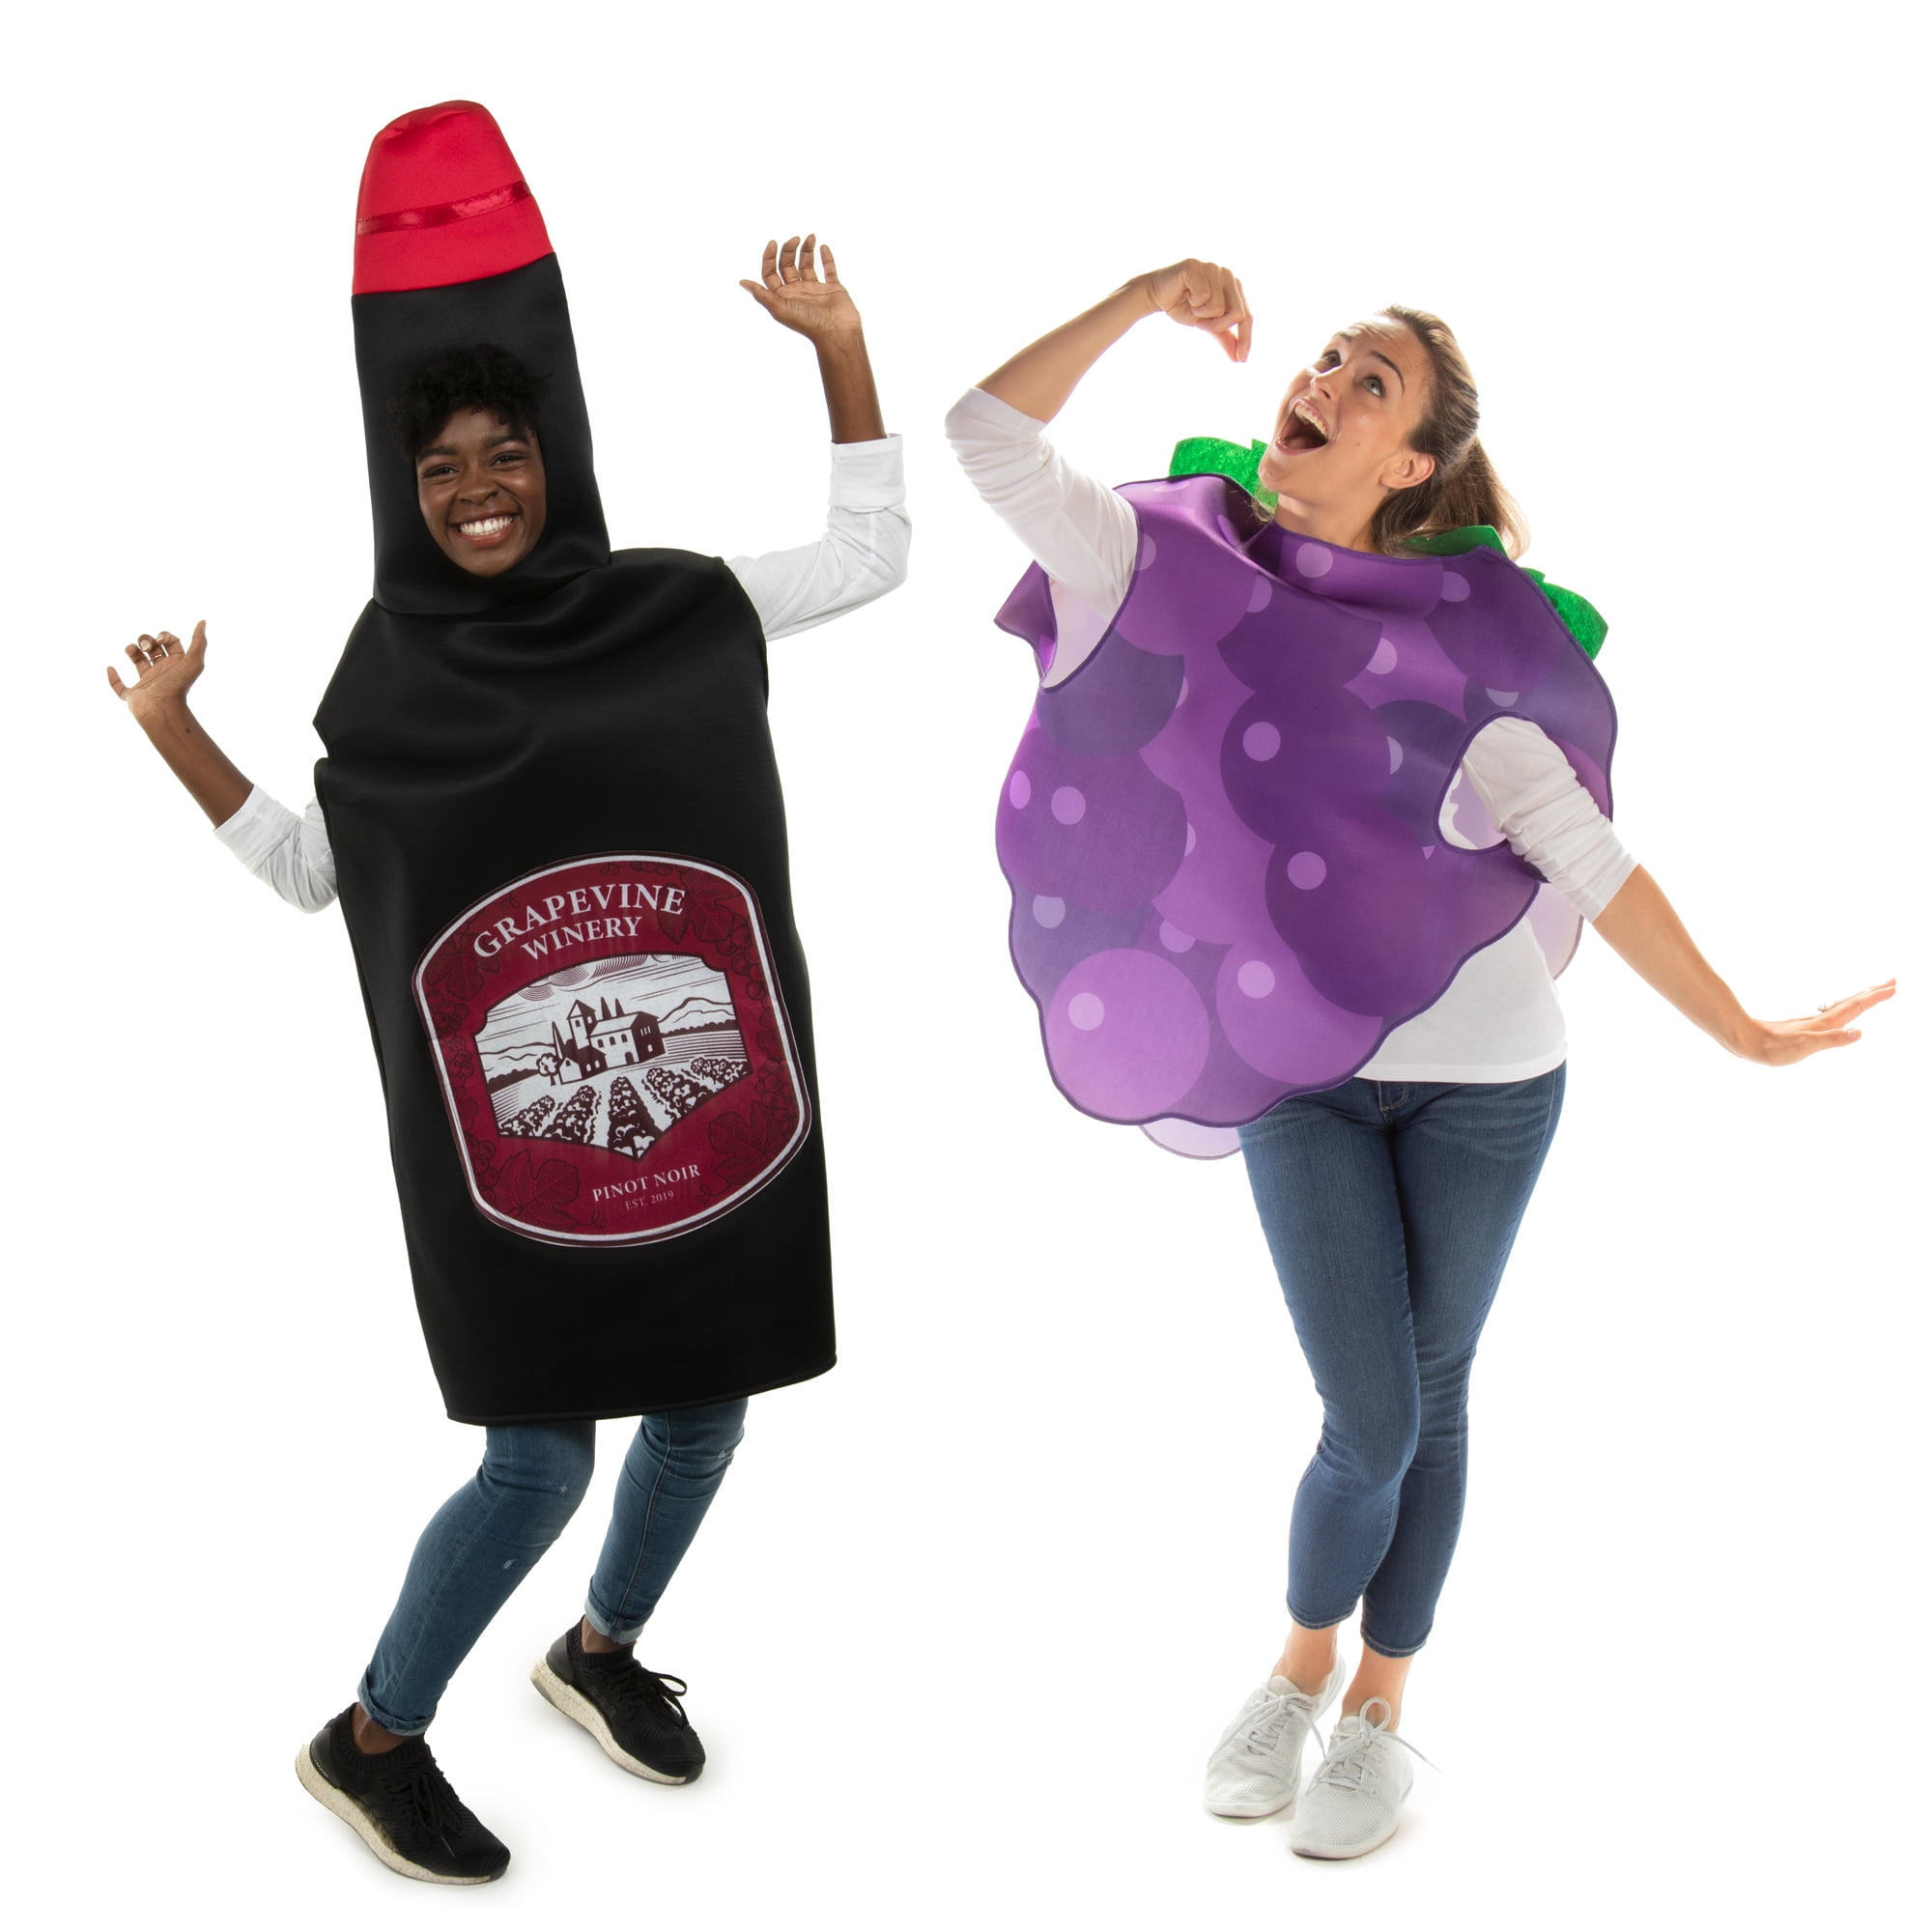 Funny Hand Costume for Adults